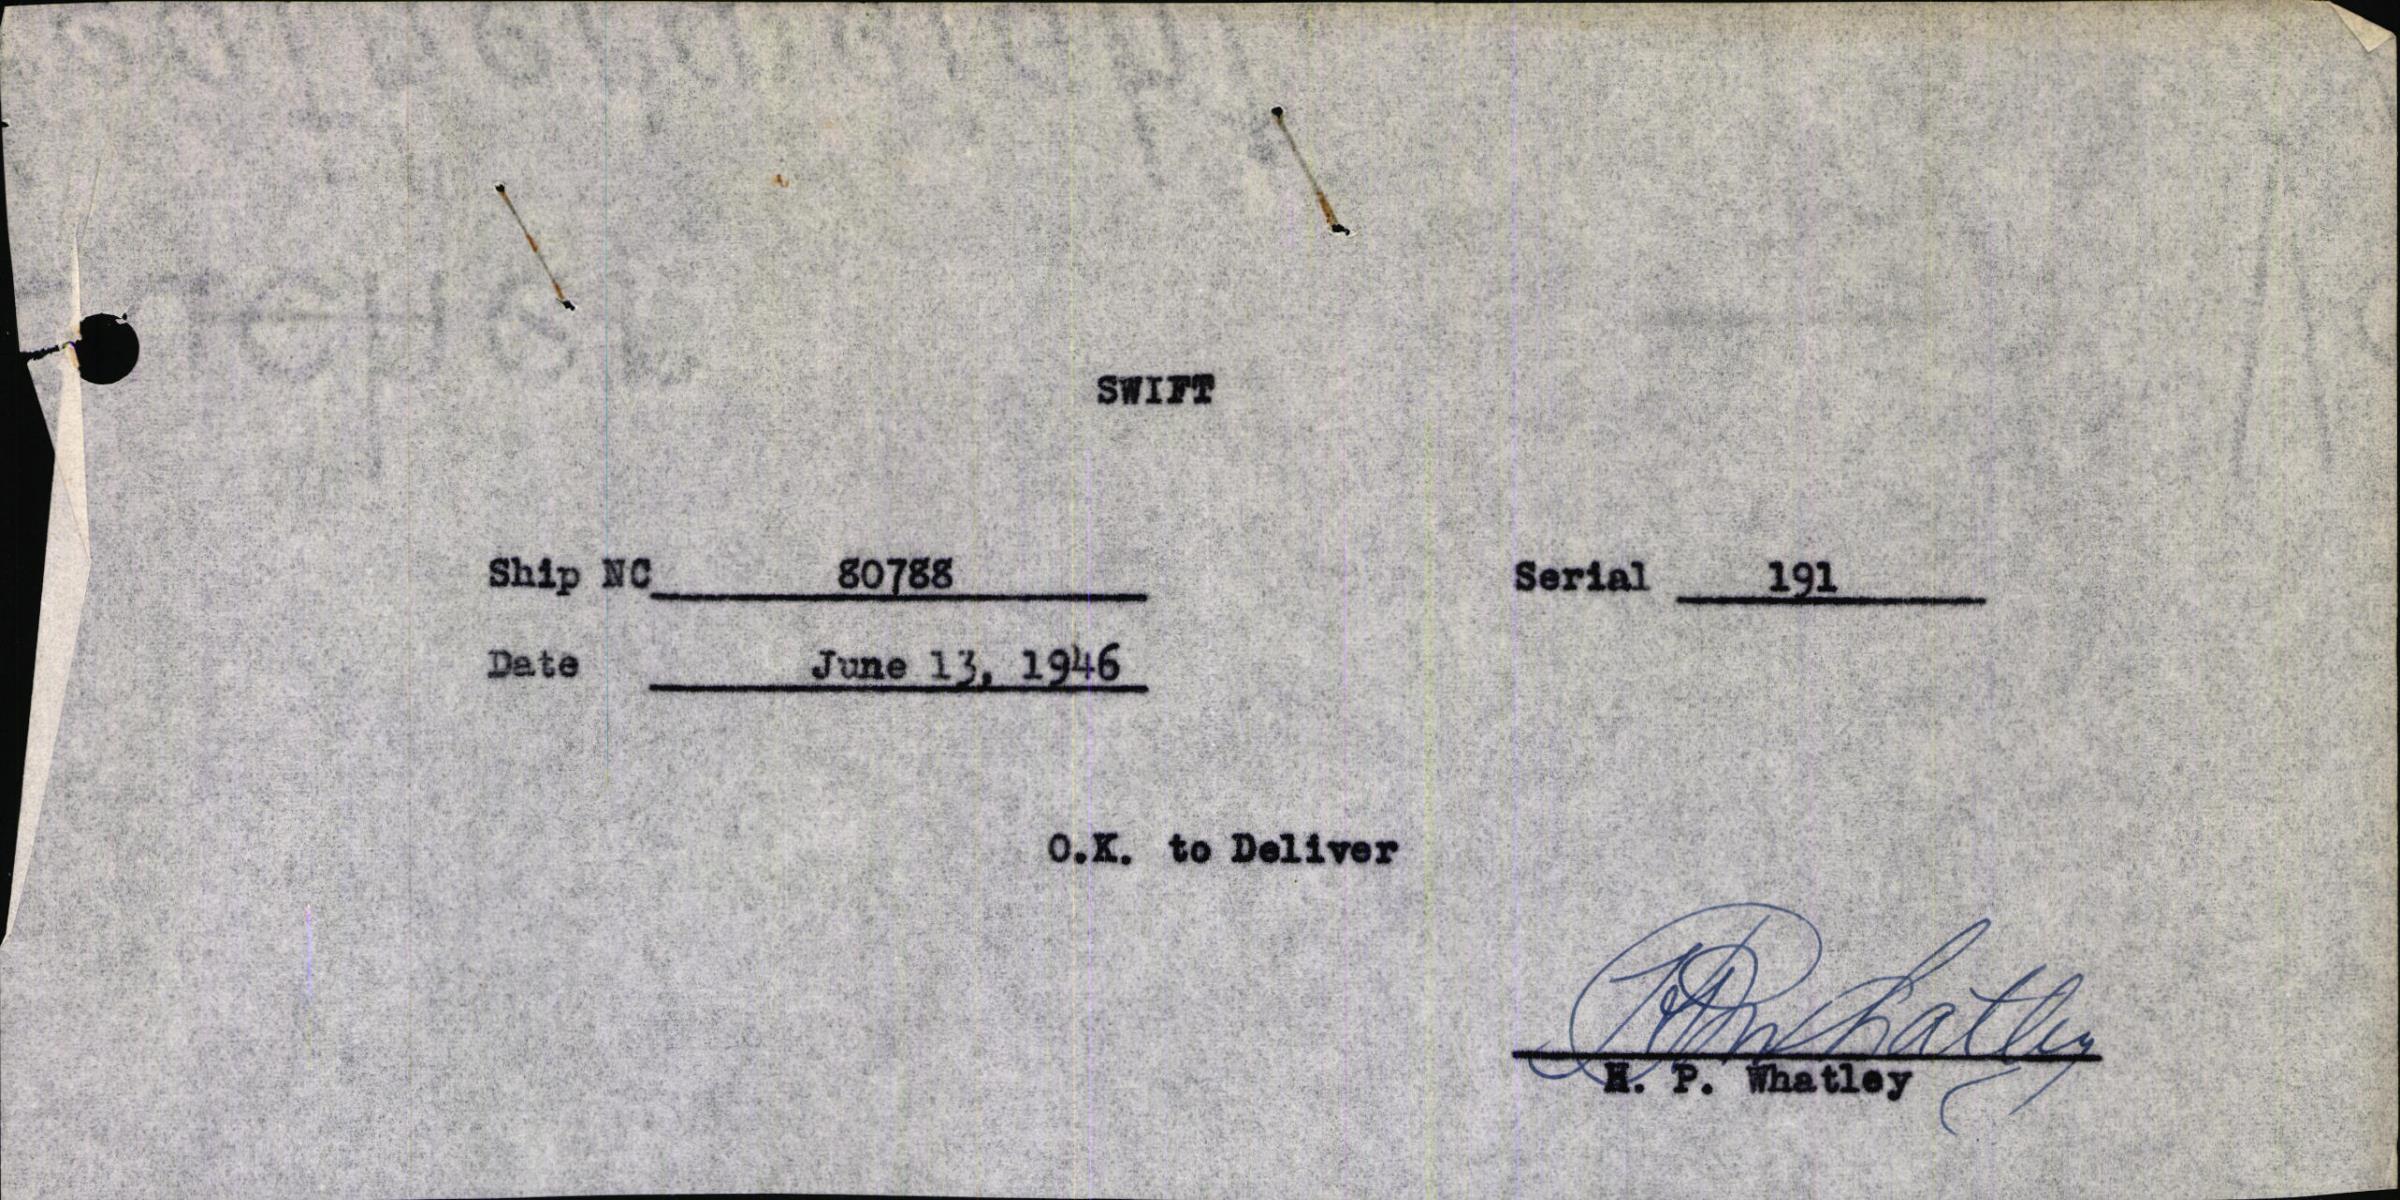 Sample page 3 from AirCorps Library document: Technical Information for Serial Number 191